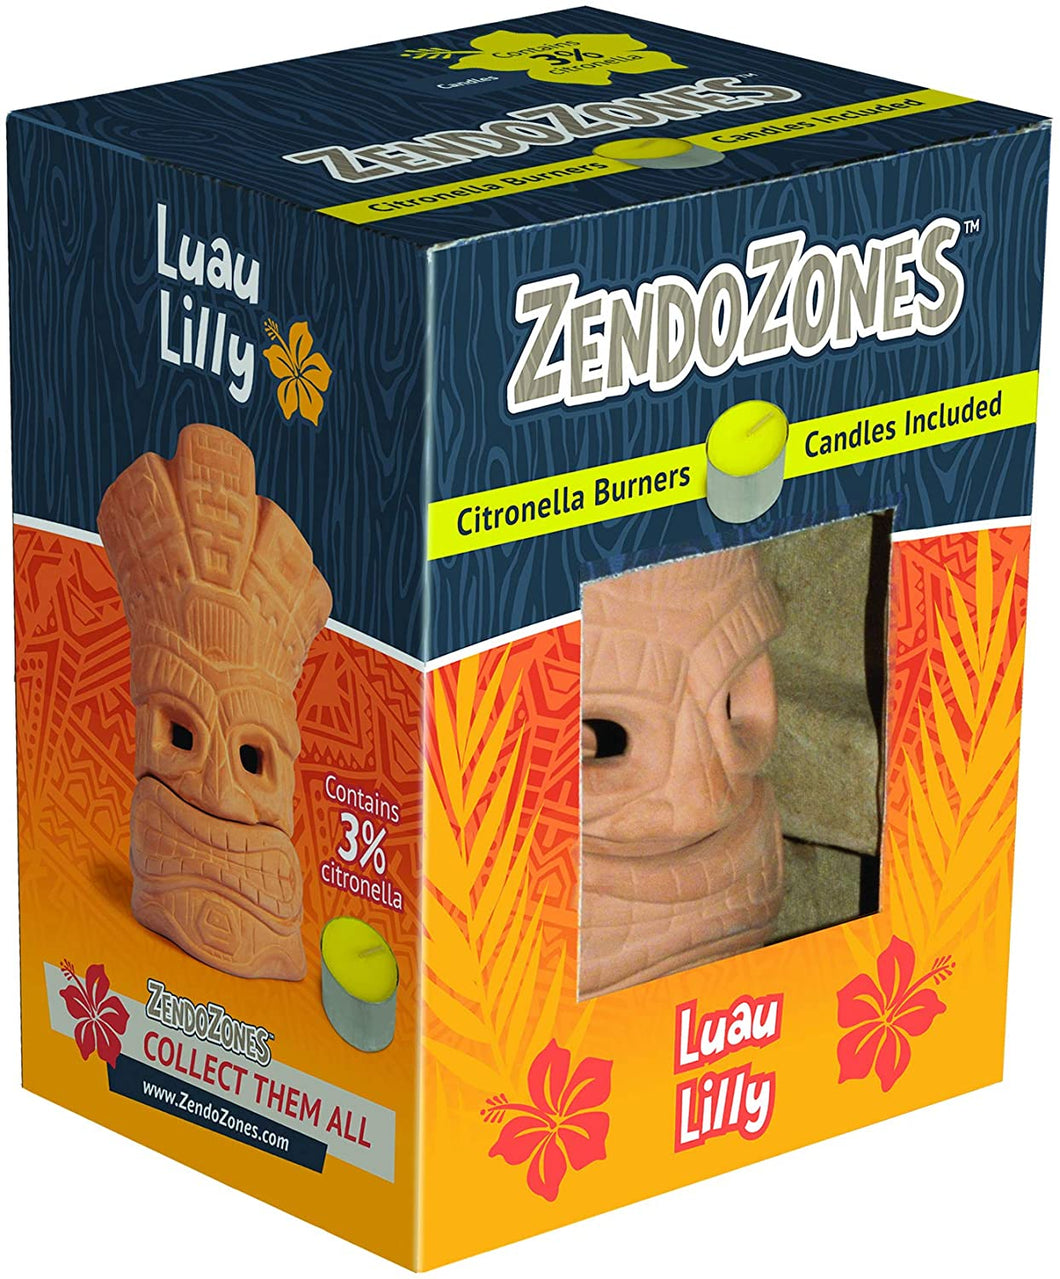 CHS ZendoZones 18P-LL Luau Lilly All-Natural Citronella Candle Burner All-natural Citronella Candle burns for up to 8 hours Perfect for patios, decks, backyards, campsites, poolside, and more Portable burner figurine to help you find your Zen anytime and anywhere Place candle in burner, light candle, you are in the ZendoZone INCLUDES 3 Citronella Candles with 3% Citronella